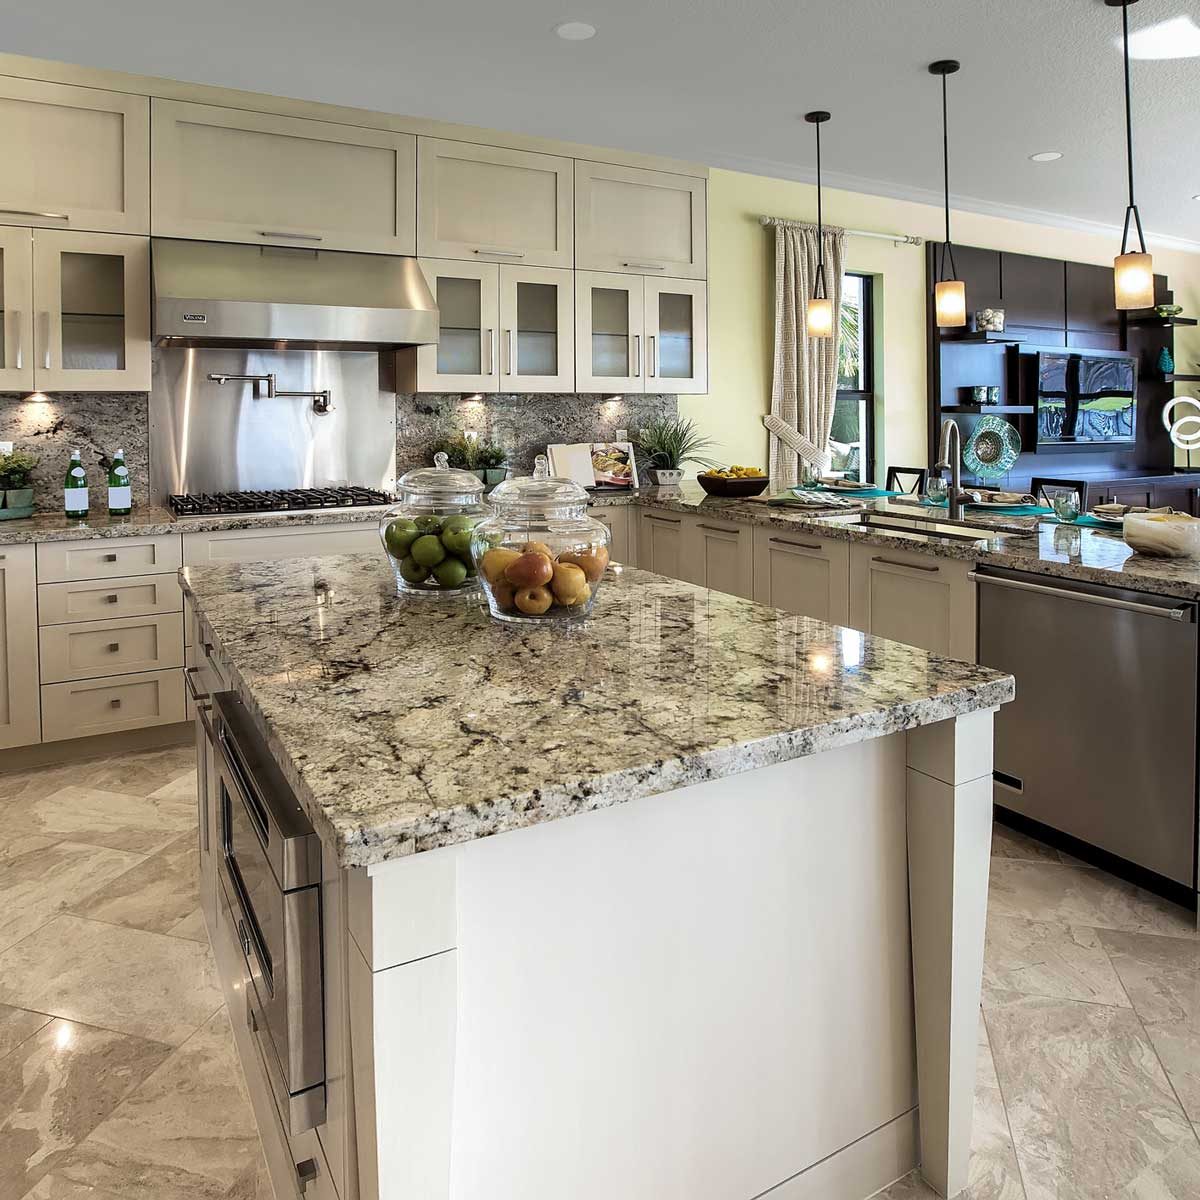 What to Know About Countertop Options | Family Handyman